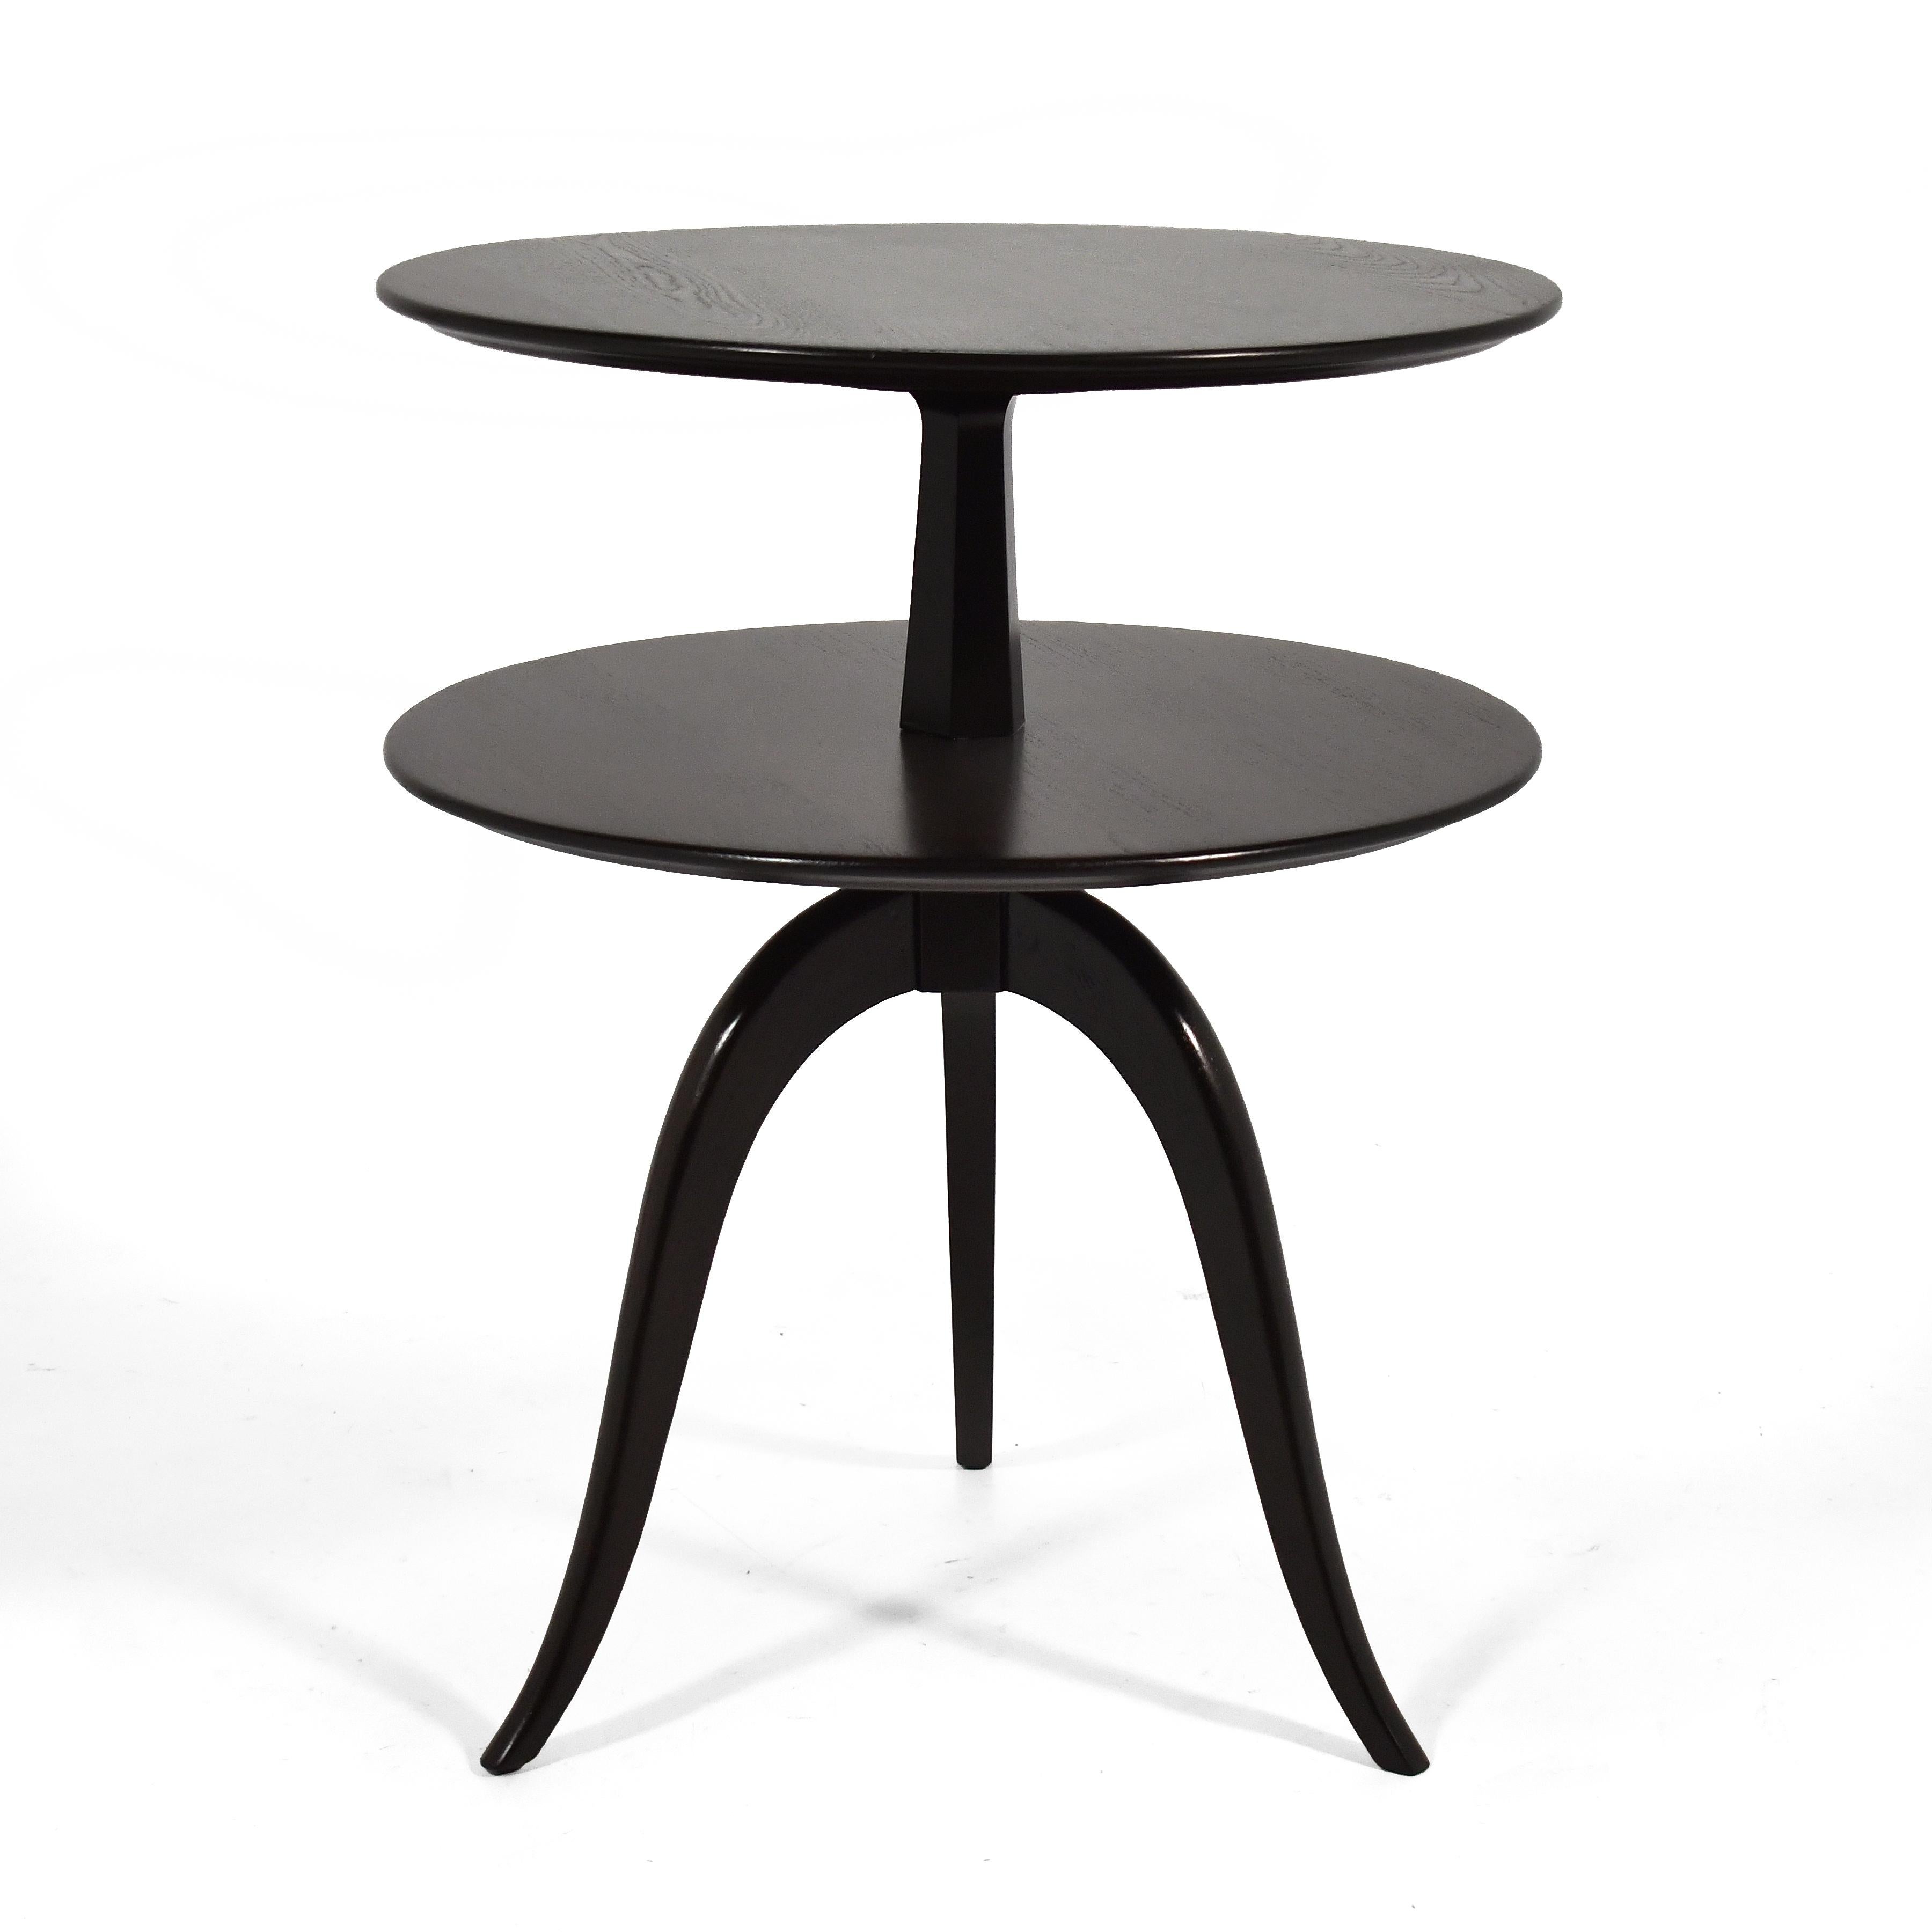 This elegant design by Paul Frankl for Brown-Saltman has many uses. The three gracefully curved and tapered legs support a pair of round tops and the form, shape and scale allow it to serve as a side table, an end table, nightstand, lamp table, or